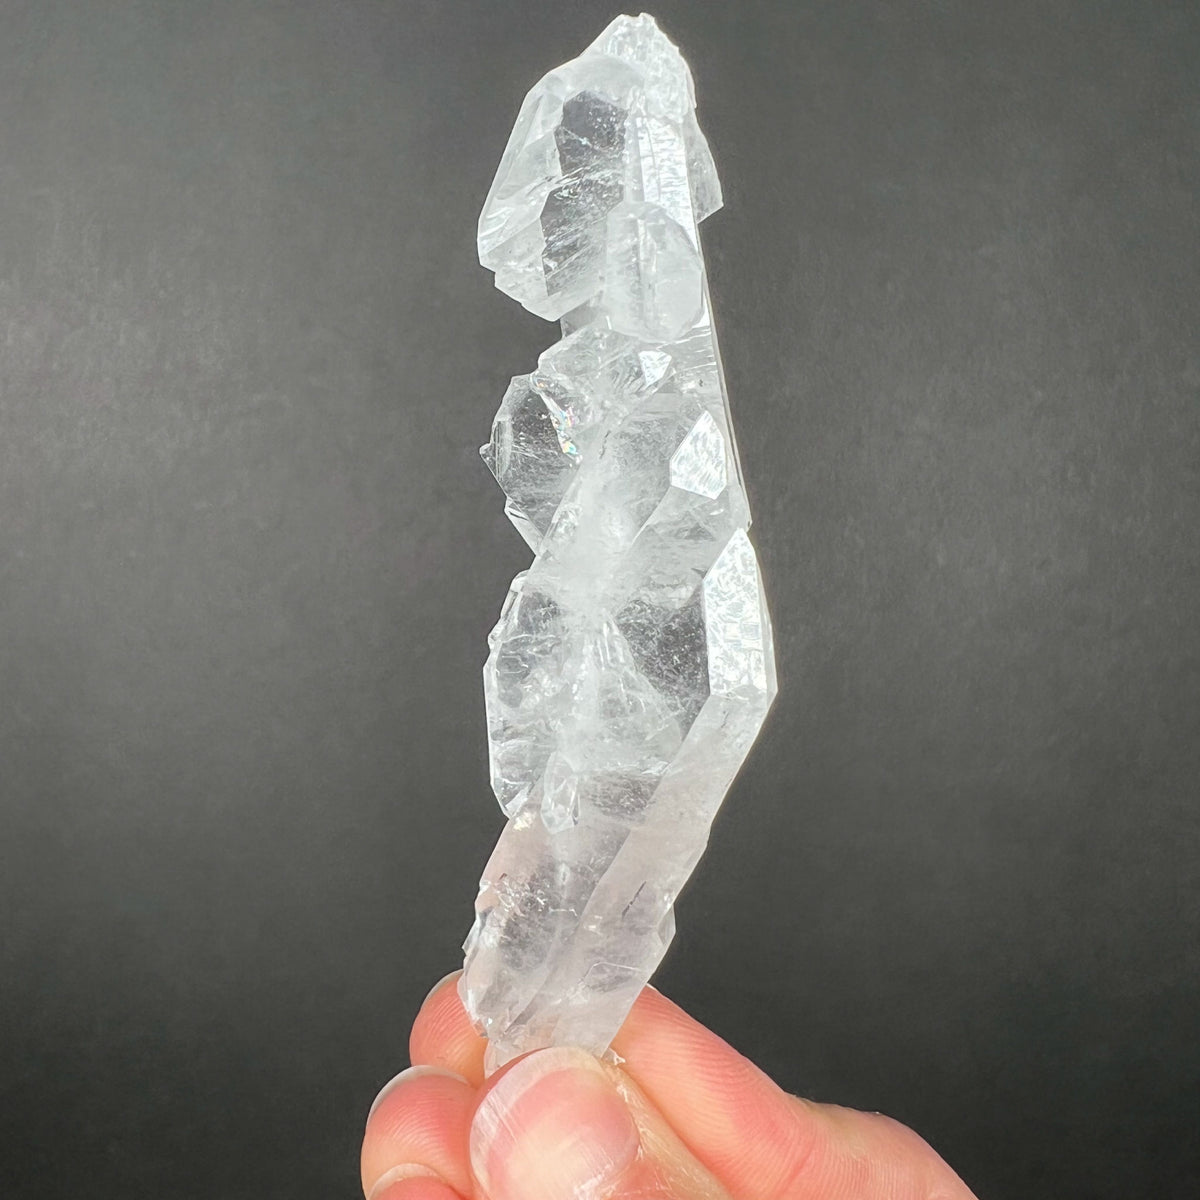 Clear Quartz Crystal with Heal Marks